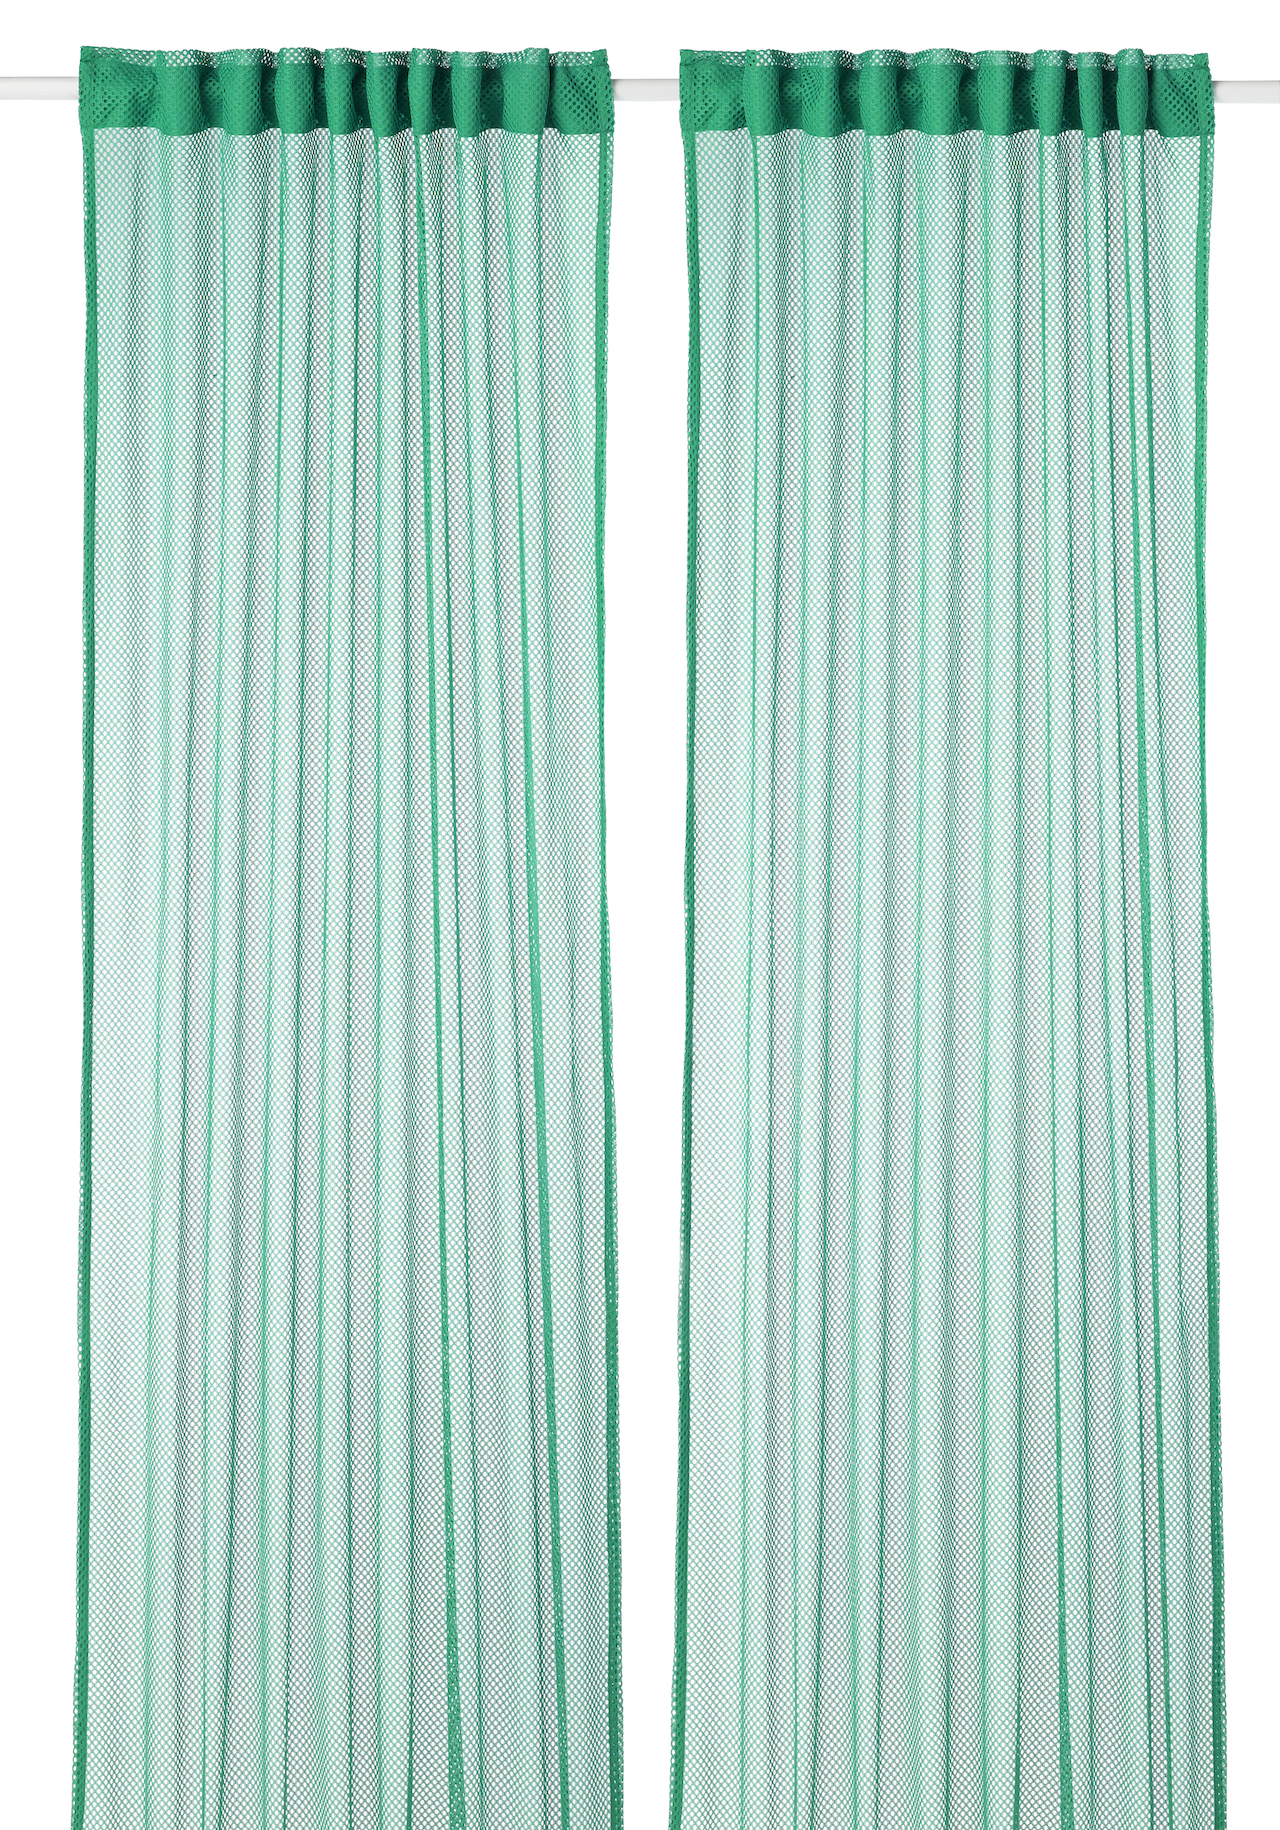 backyard privacy-Ikea-Gratistel curtains in mint green block the view on a porch